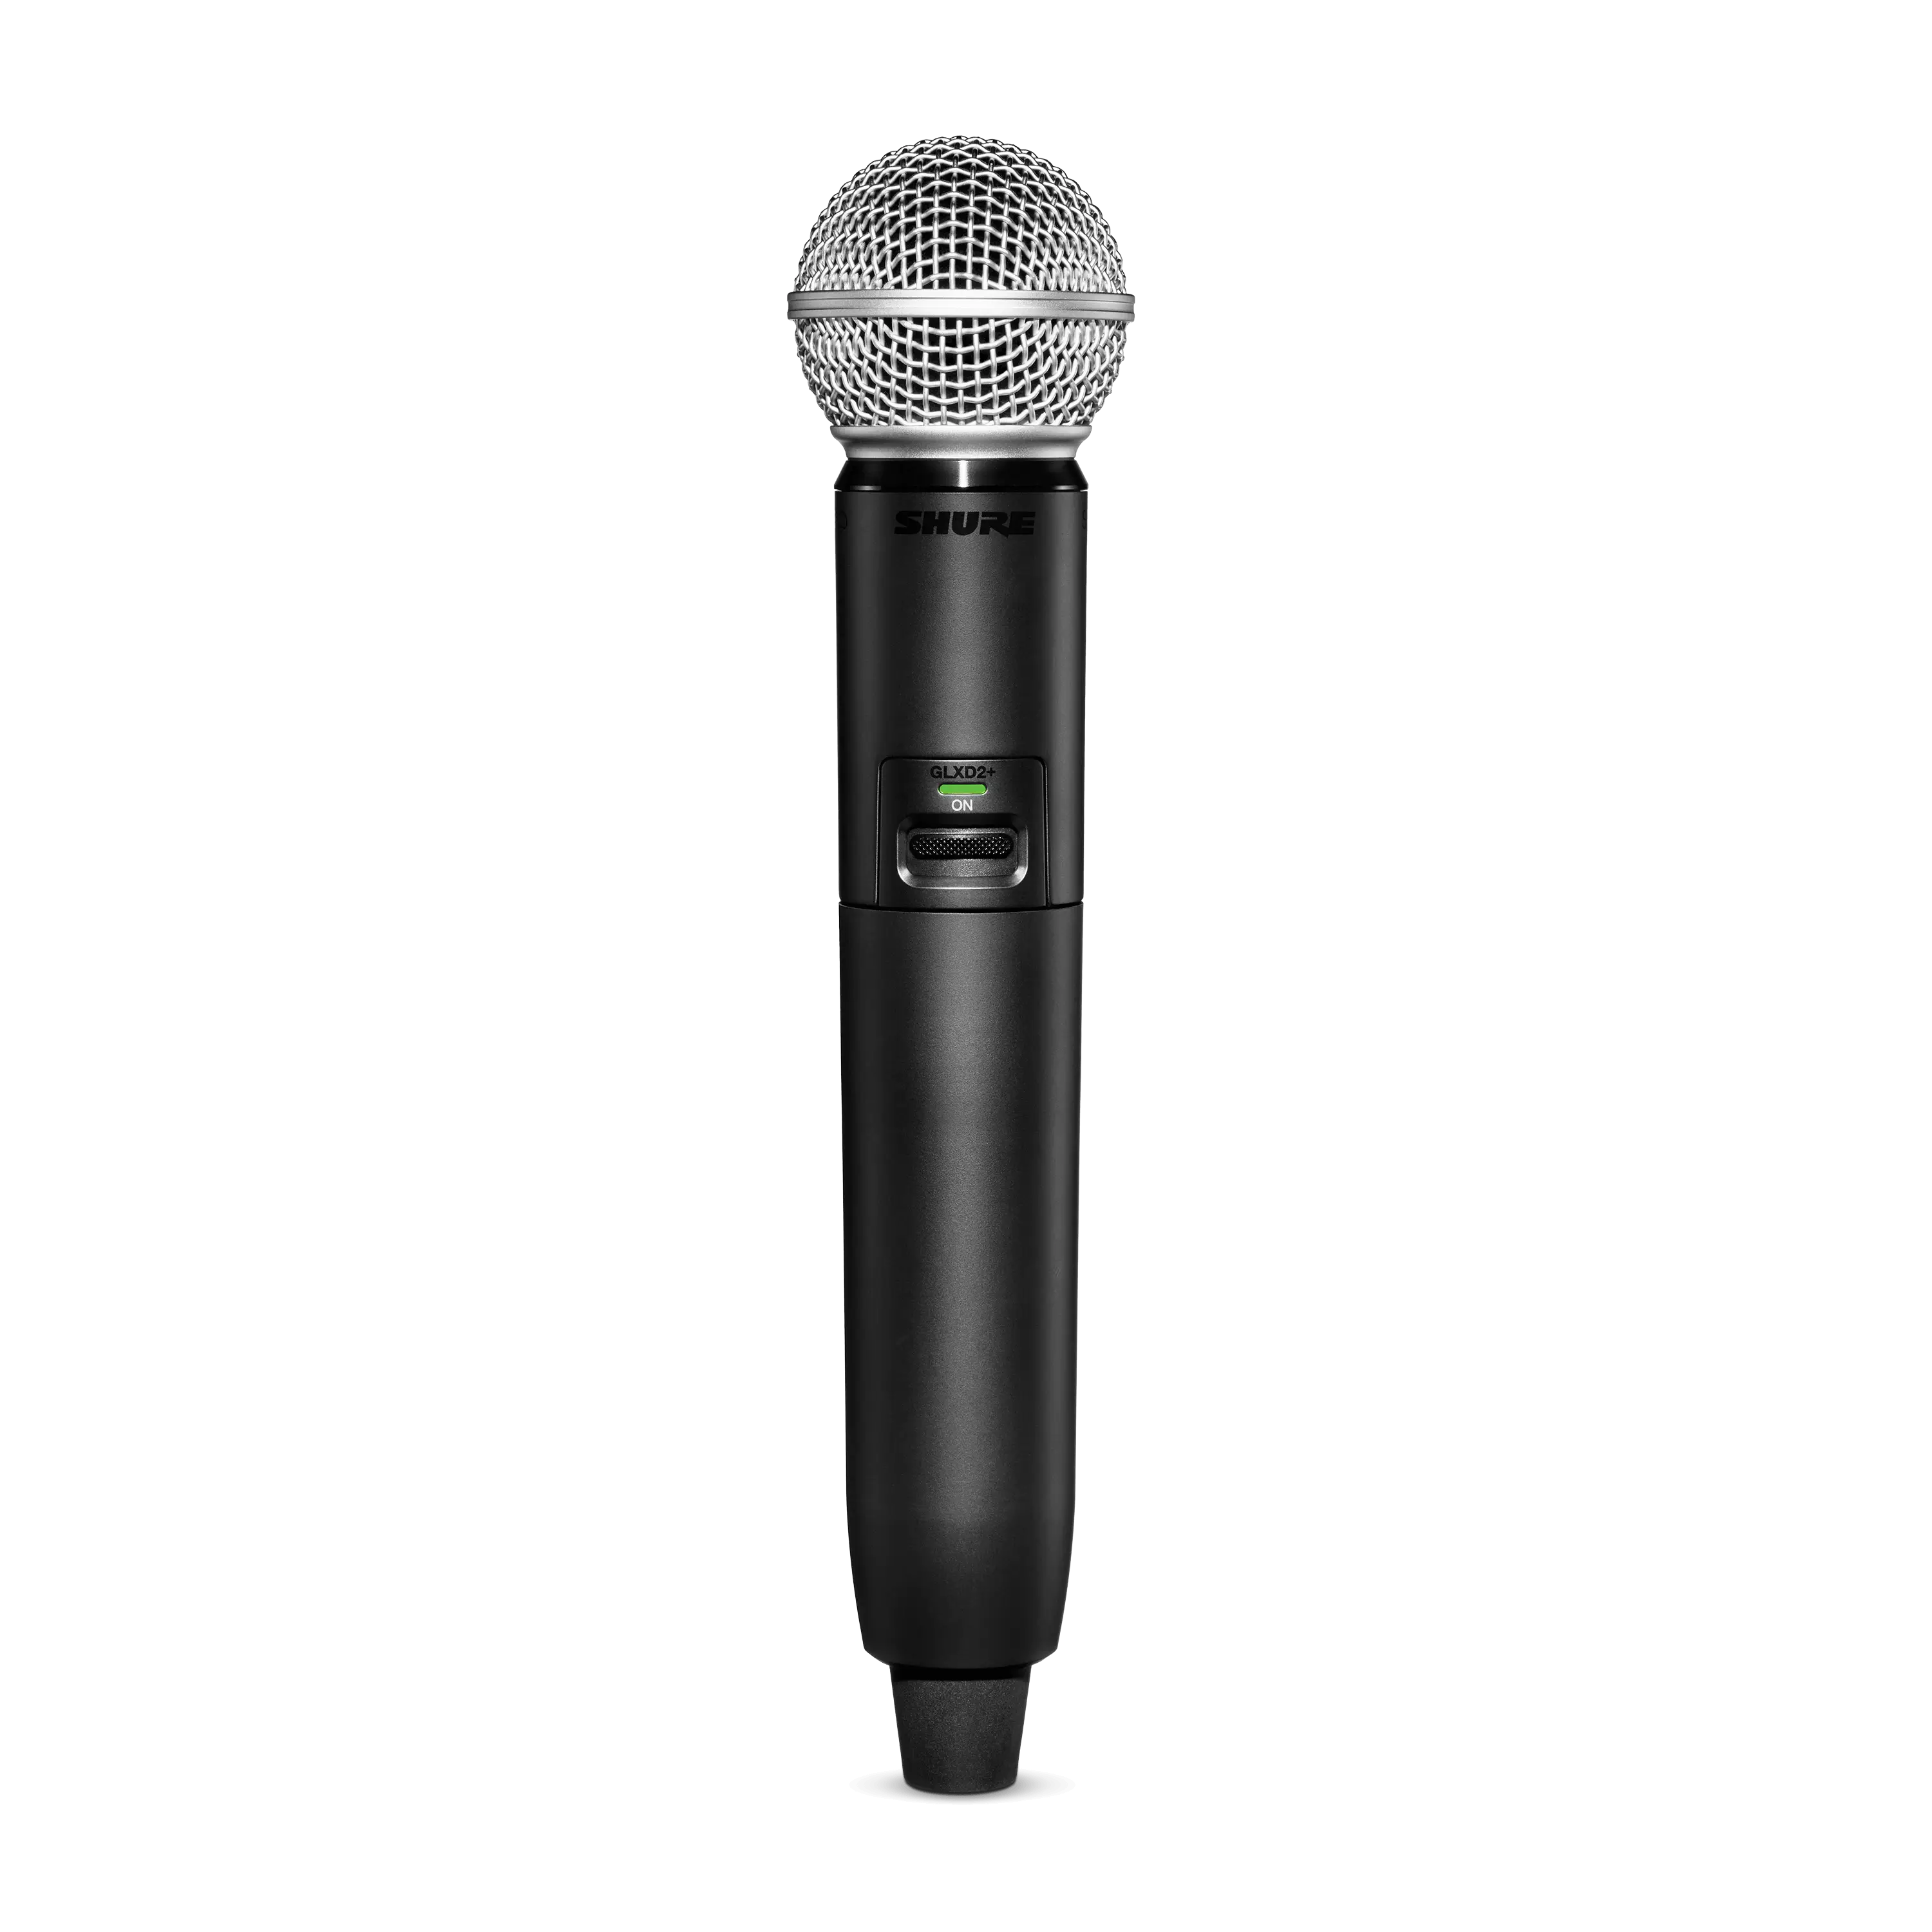 GLXD2+/SM58=-Z3 Digital Wireless Dual Band Handheld Transmitter with SM58 Vocal Microphone